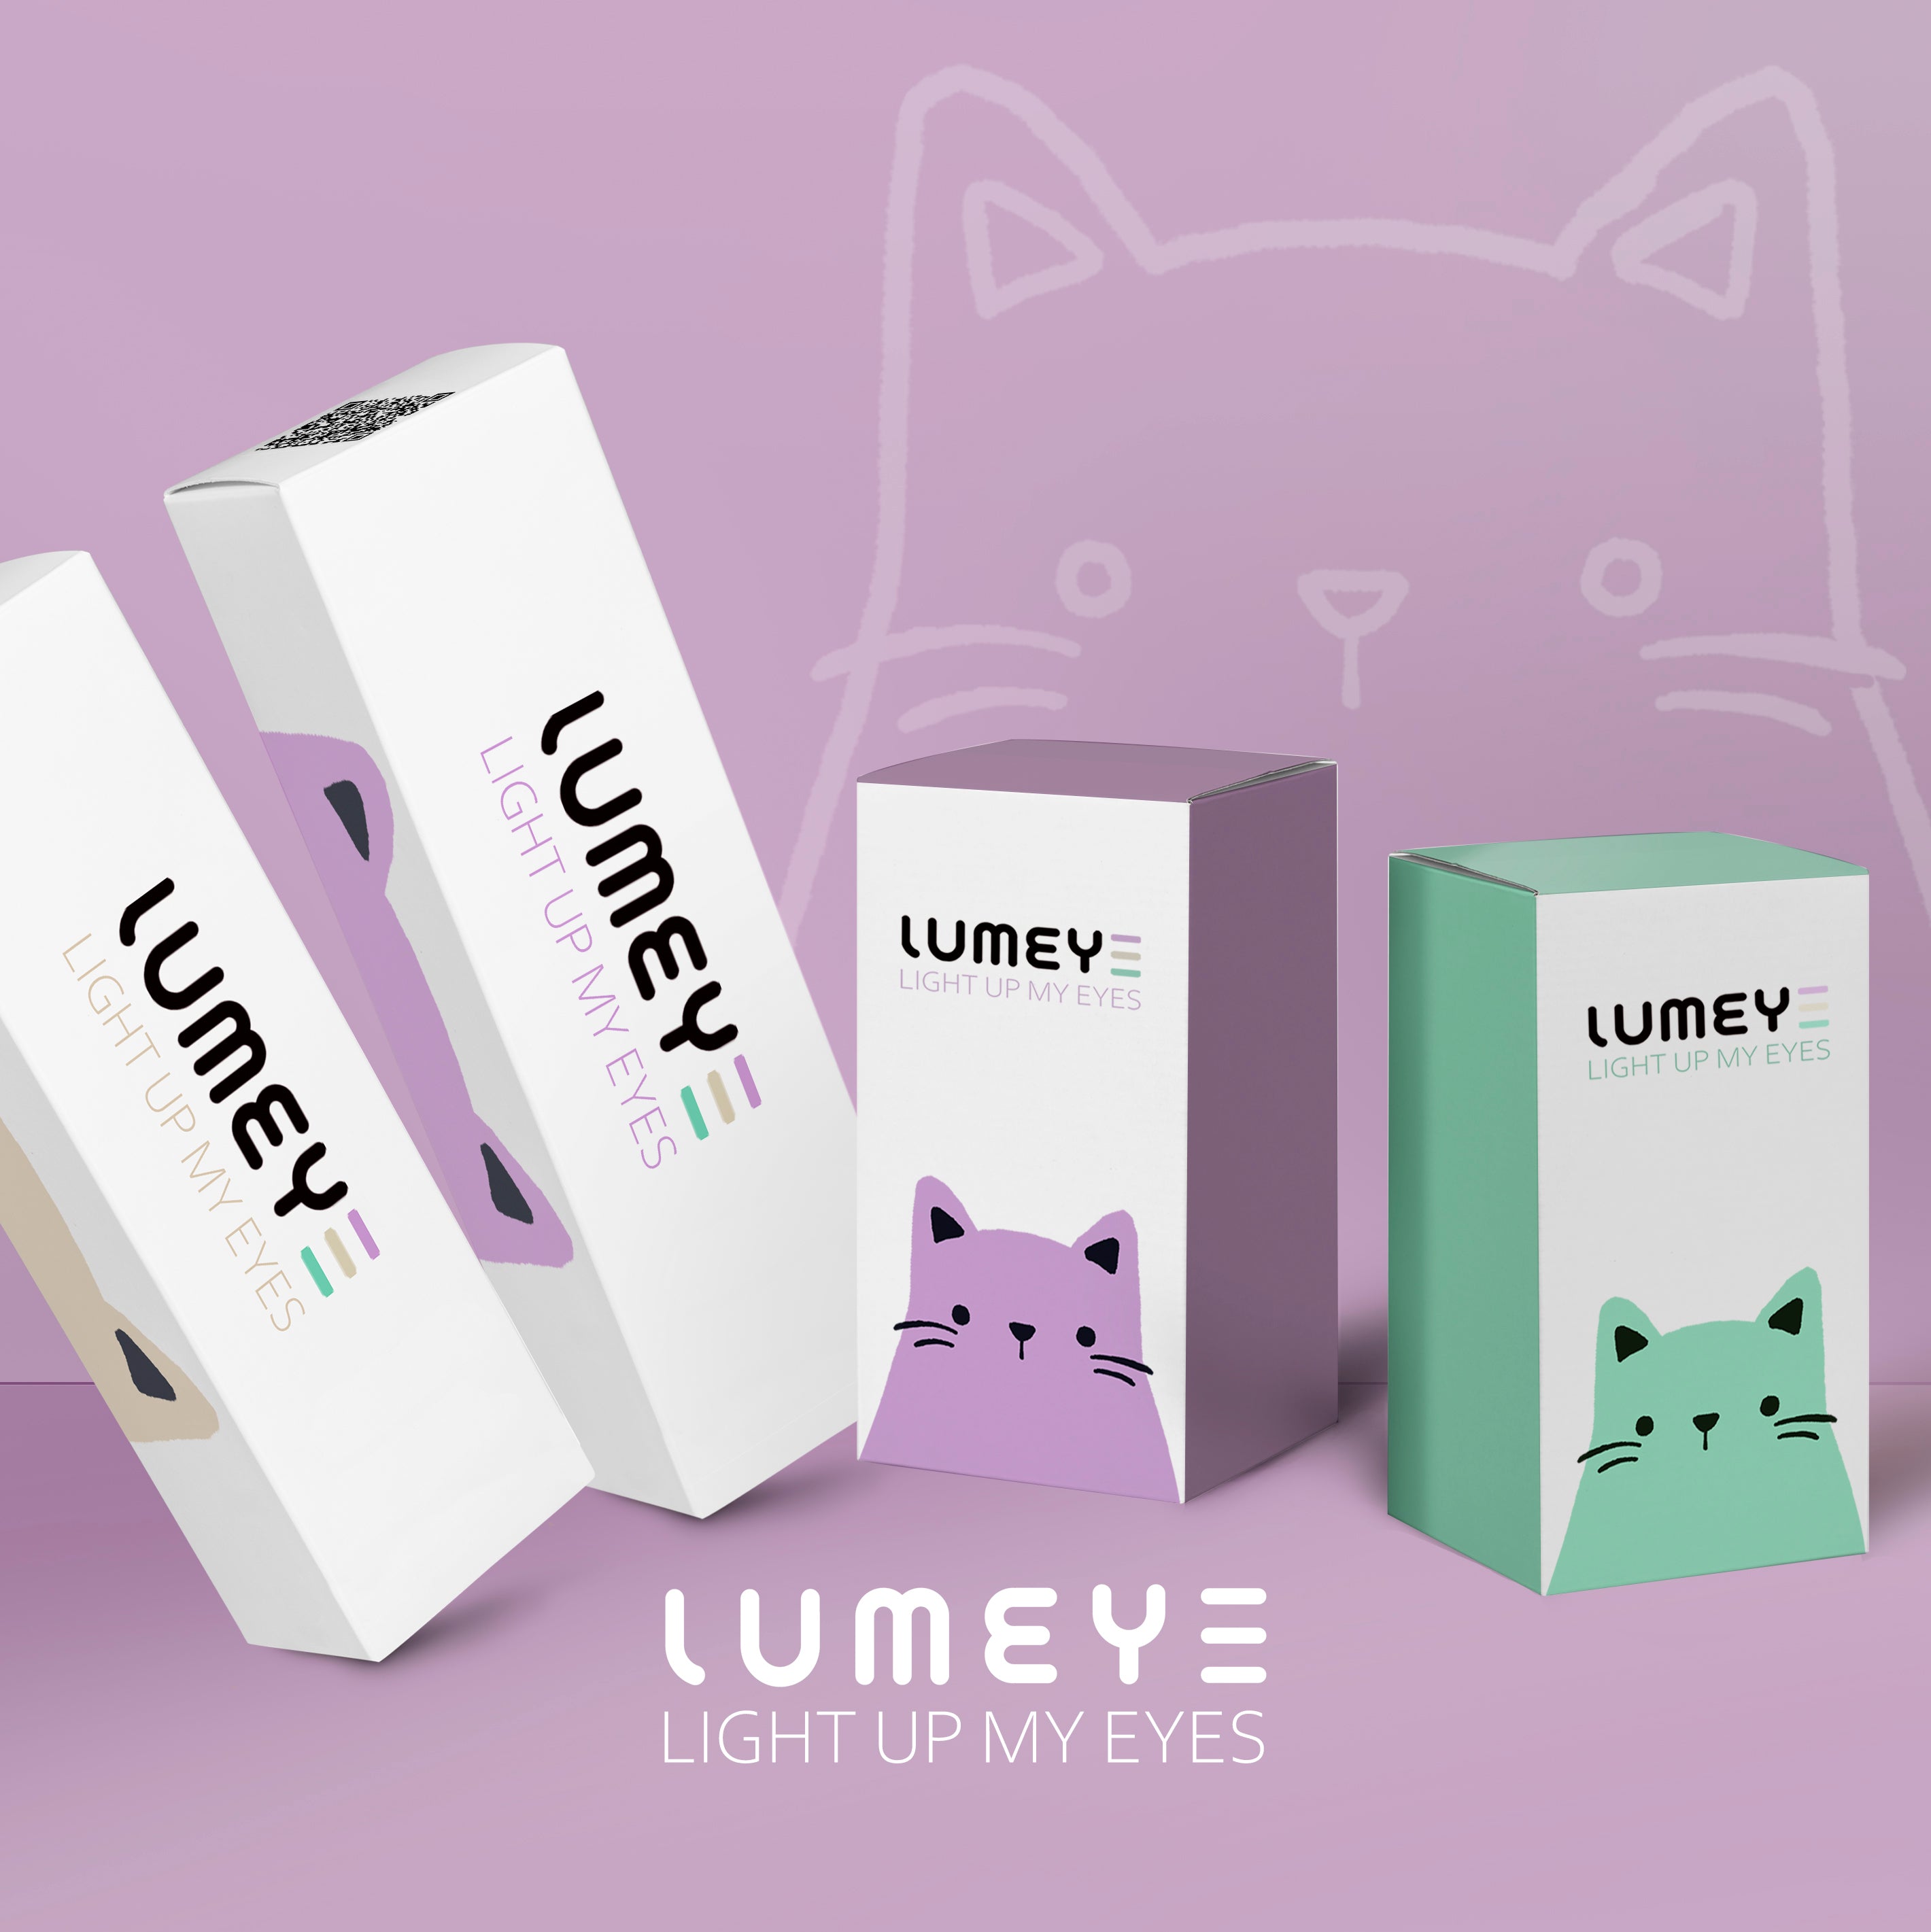 Best COLORED CONTACTS - LUMEYE Real Aqua Blue Colored Contact Lenses - LUMEYE